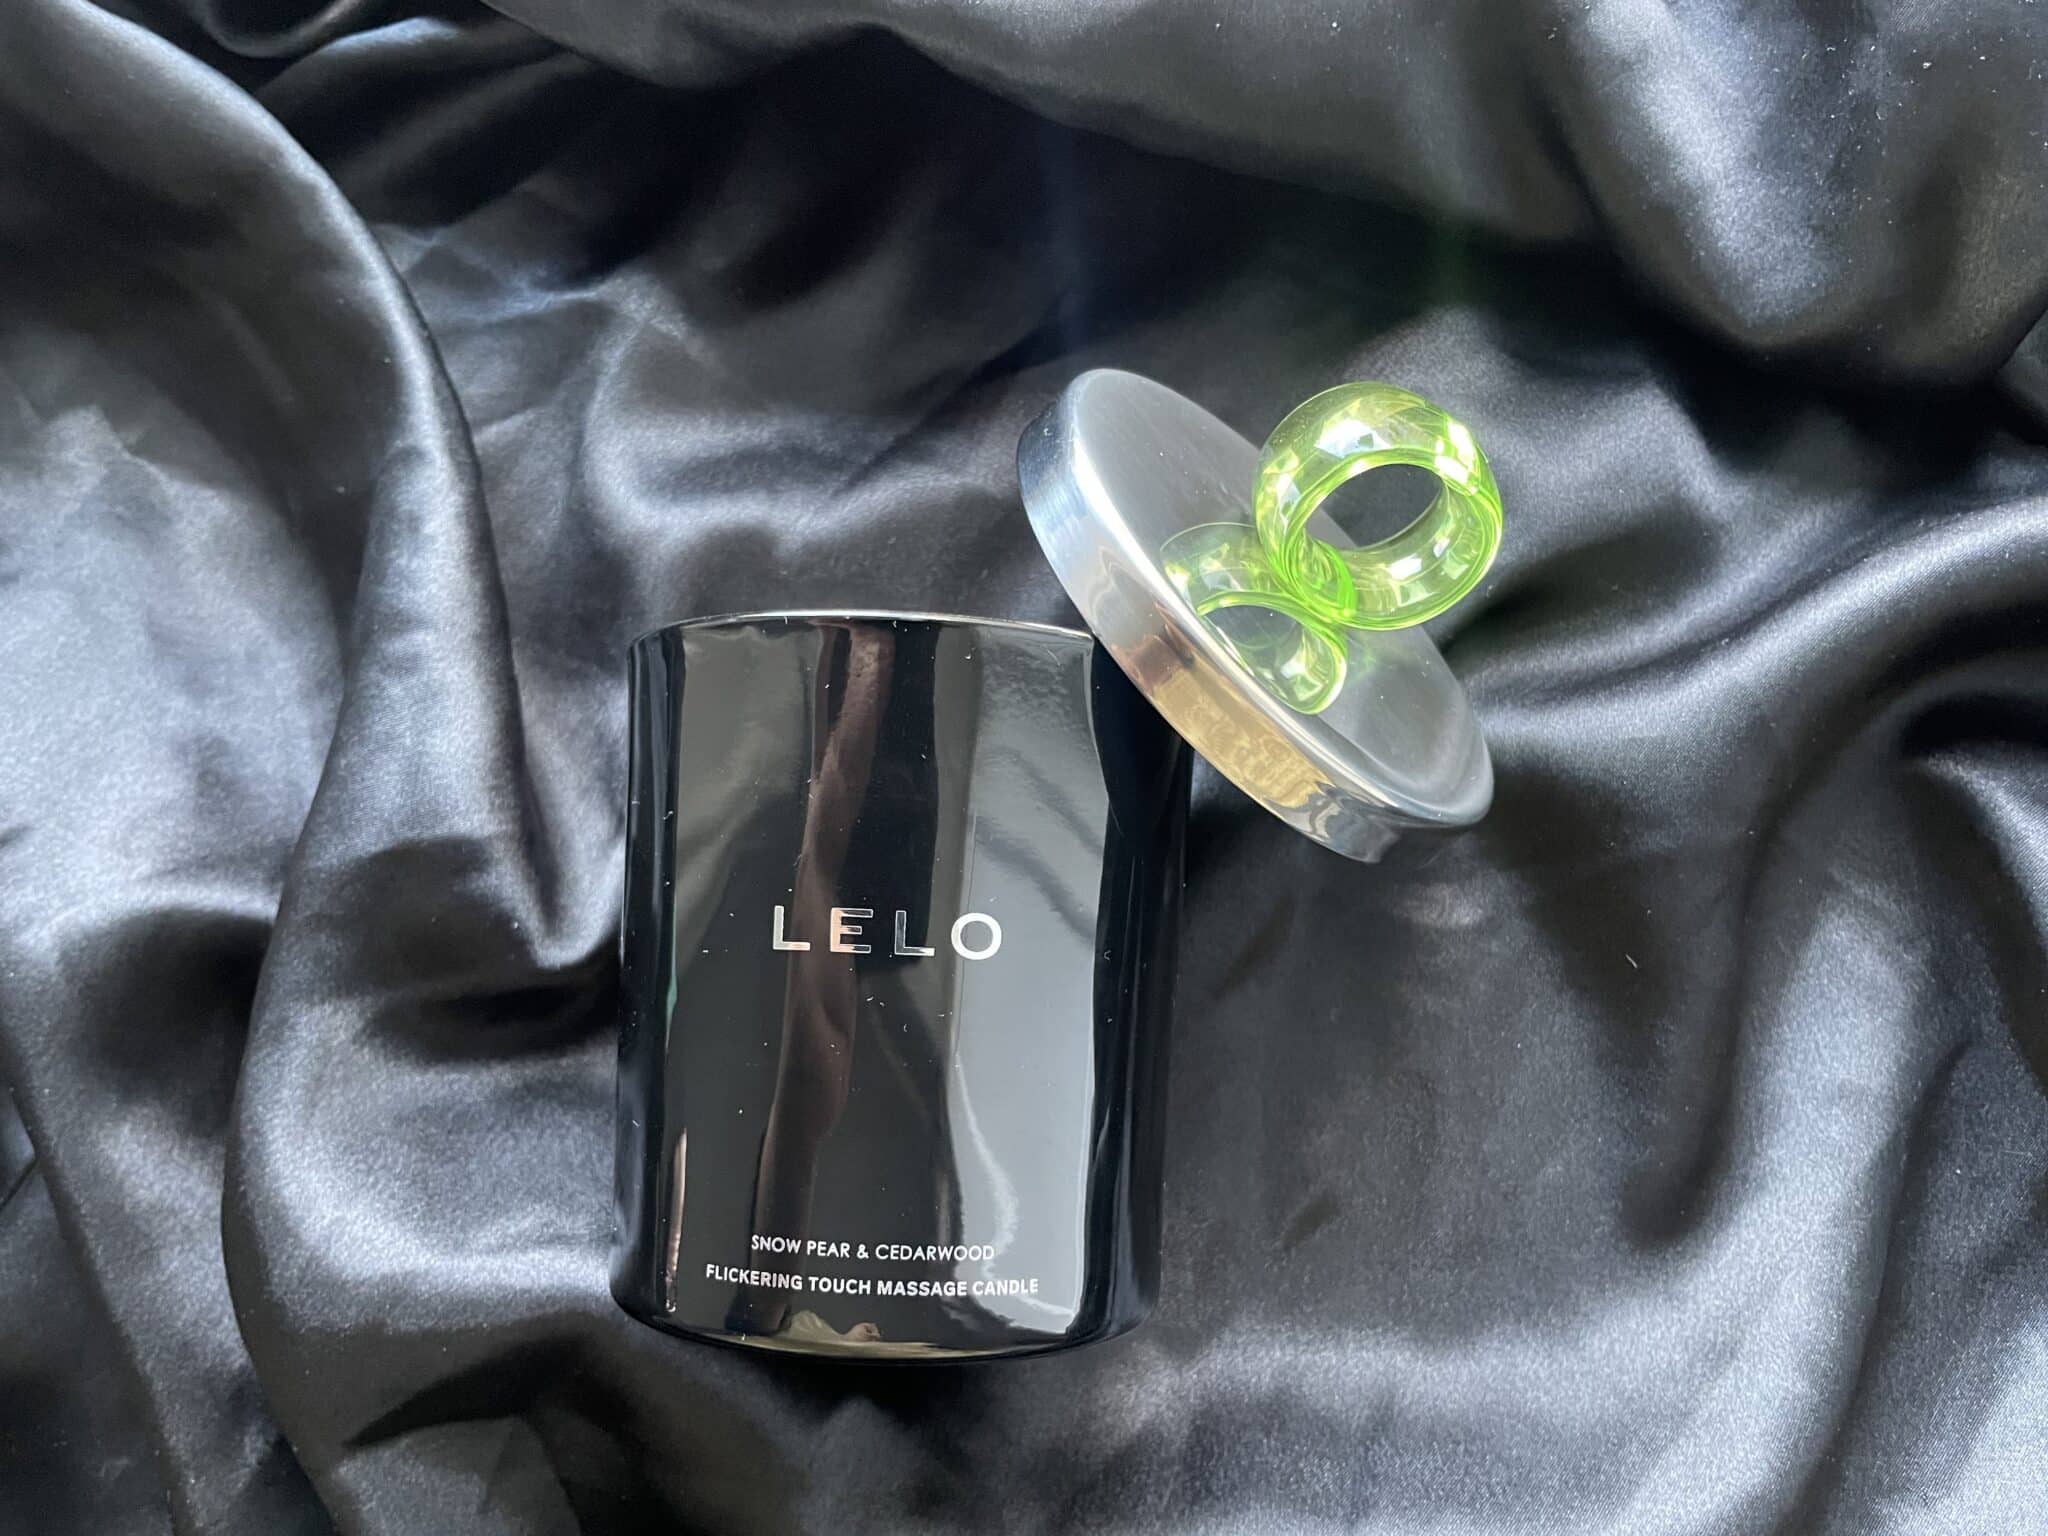 LELO Flickering Touch Massage Candle How is the LELO Flickering Touch Massage Candle designed